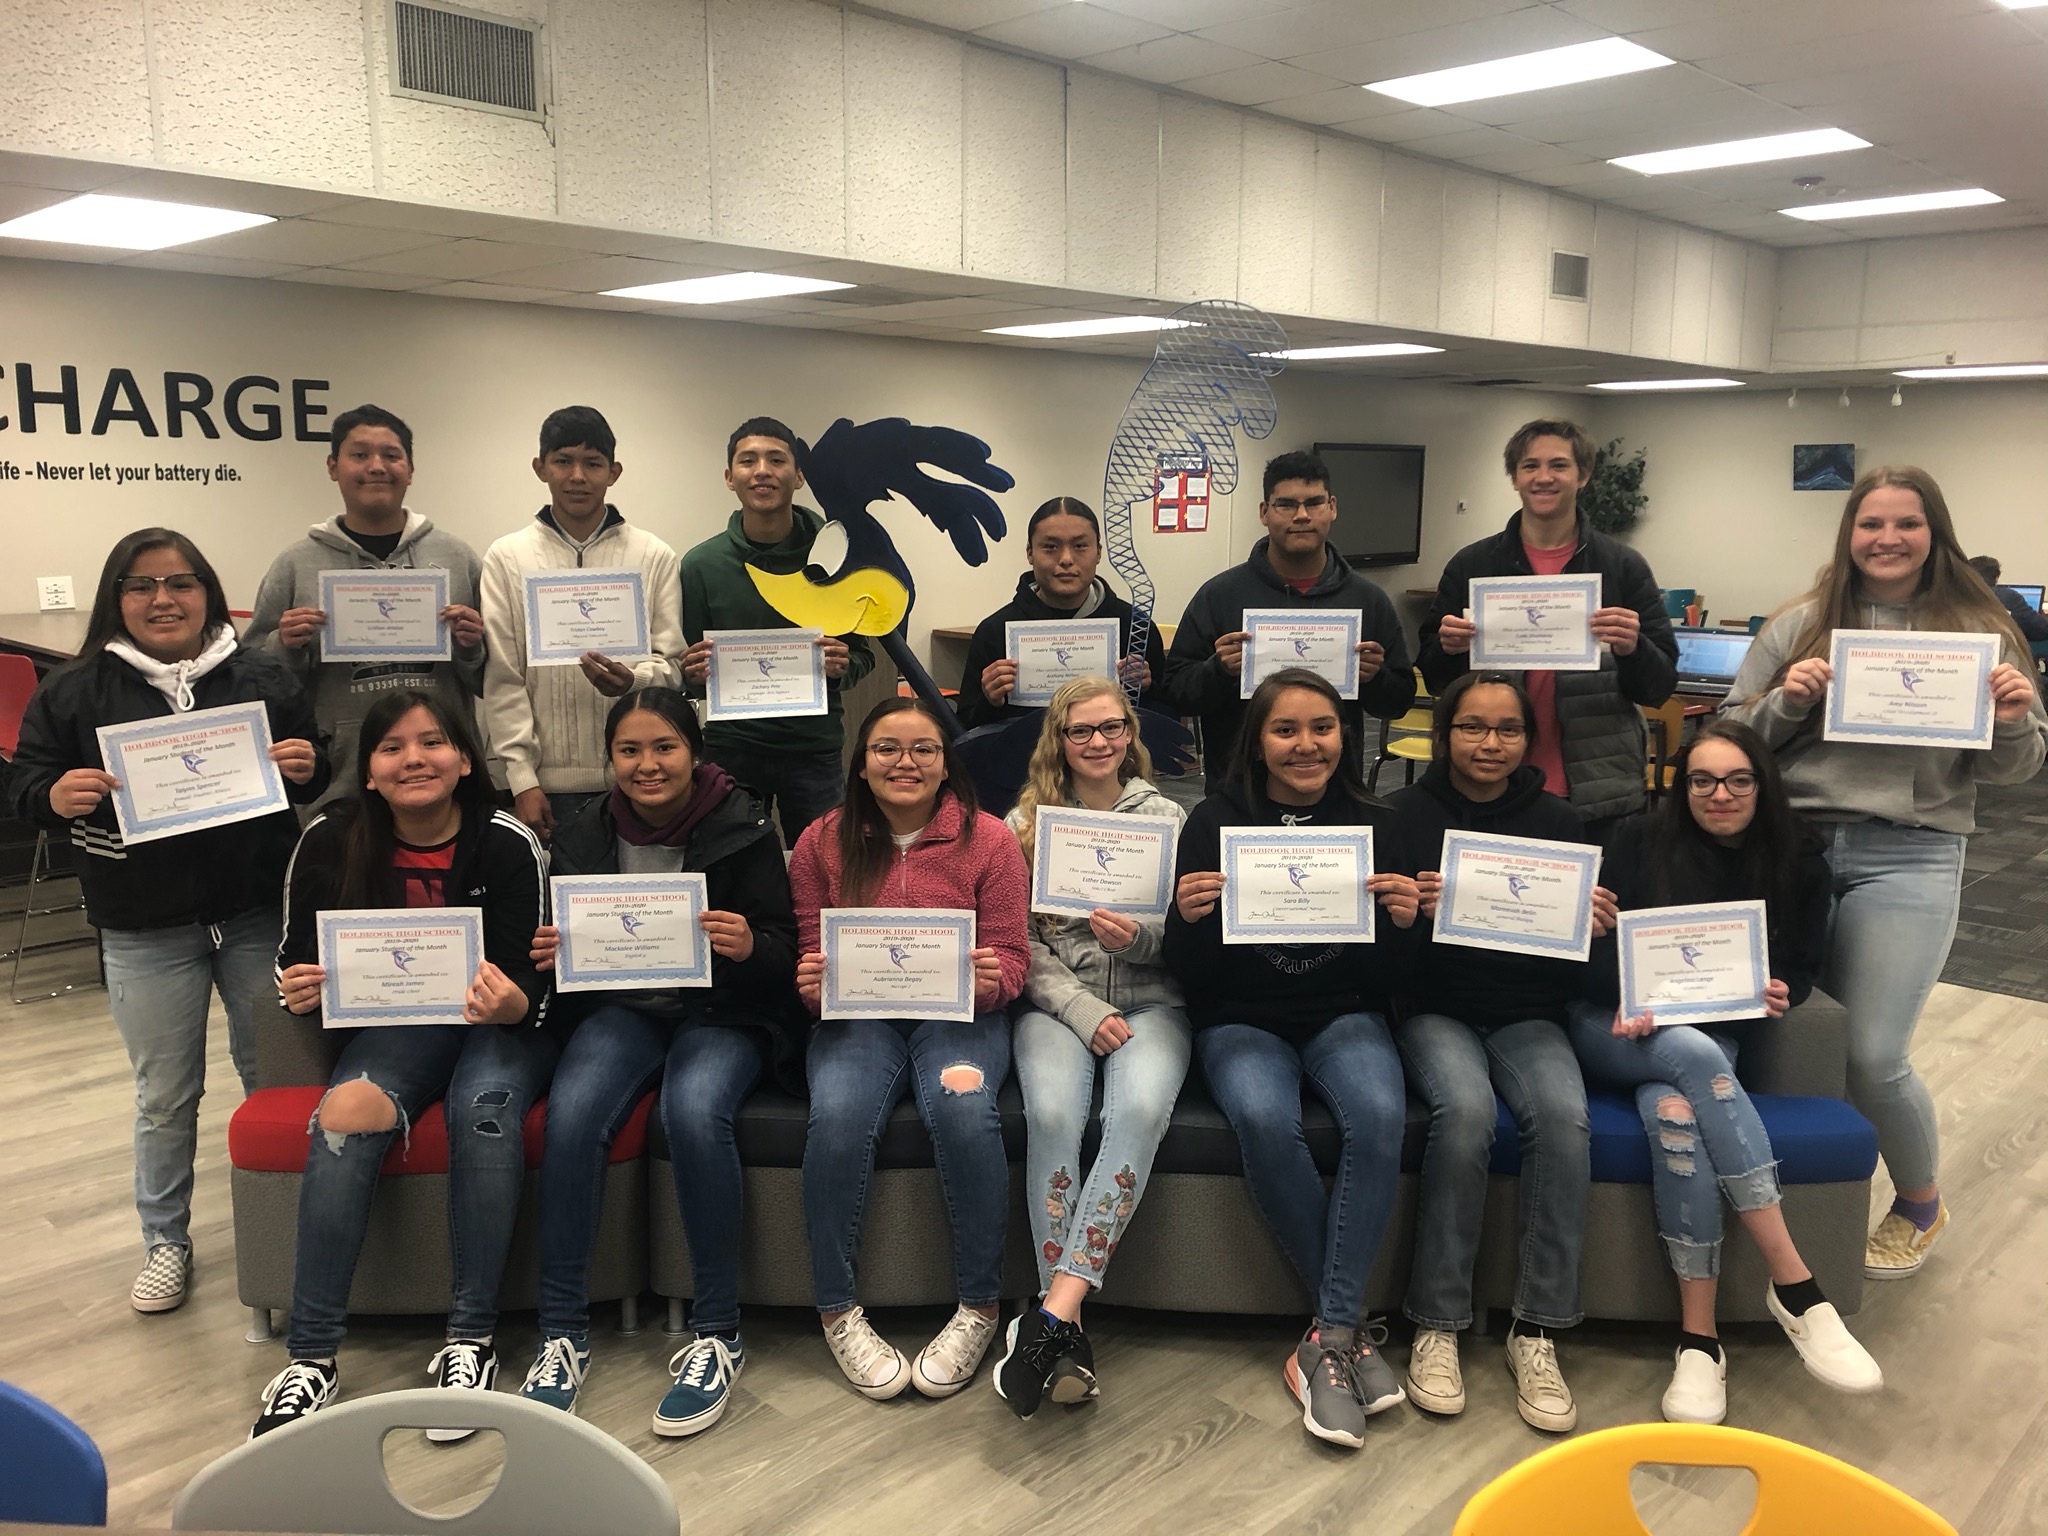 holbrook-high-school-recognizes-january-students-of-the-month-navajo-hopi-observer-navajo